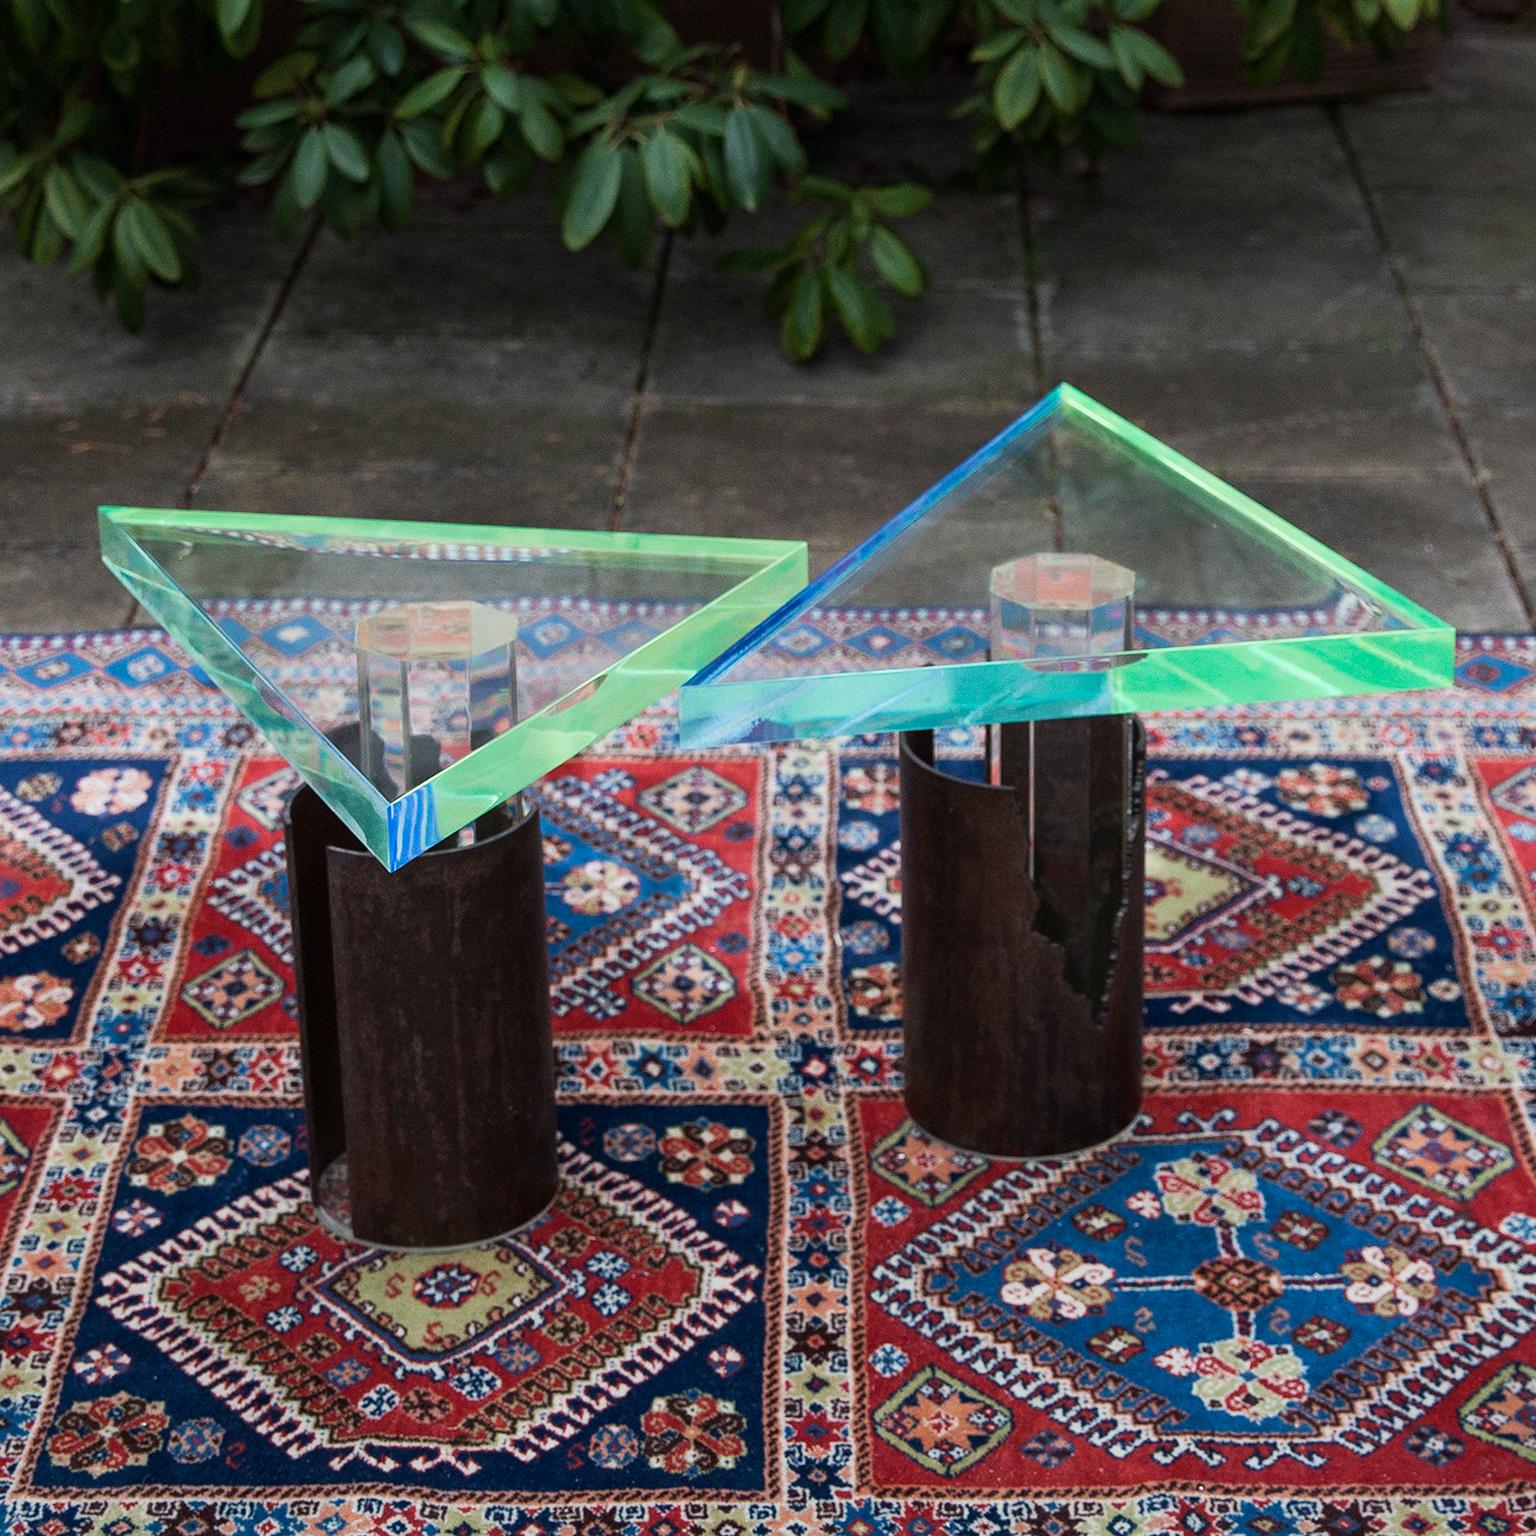 Spectacular pair of Brutalist side tables made in acrylic and bronze.
The hexagonal clear acrylic base is framed with a round brutalist bronze and the three cornered top is colored in blue and green acrylic.
A real artist statement of the